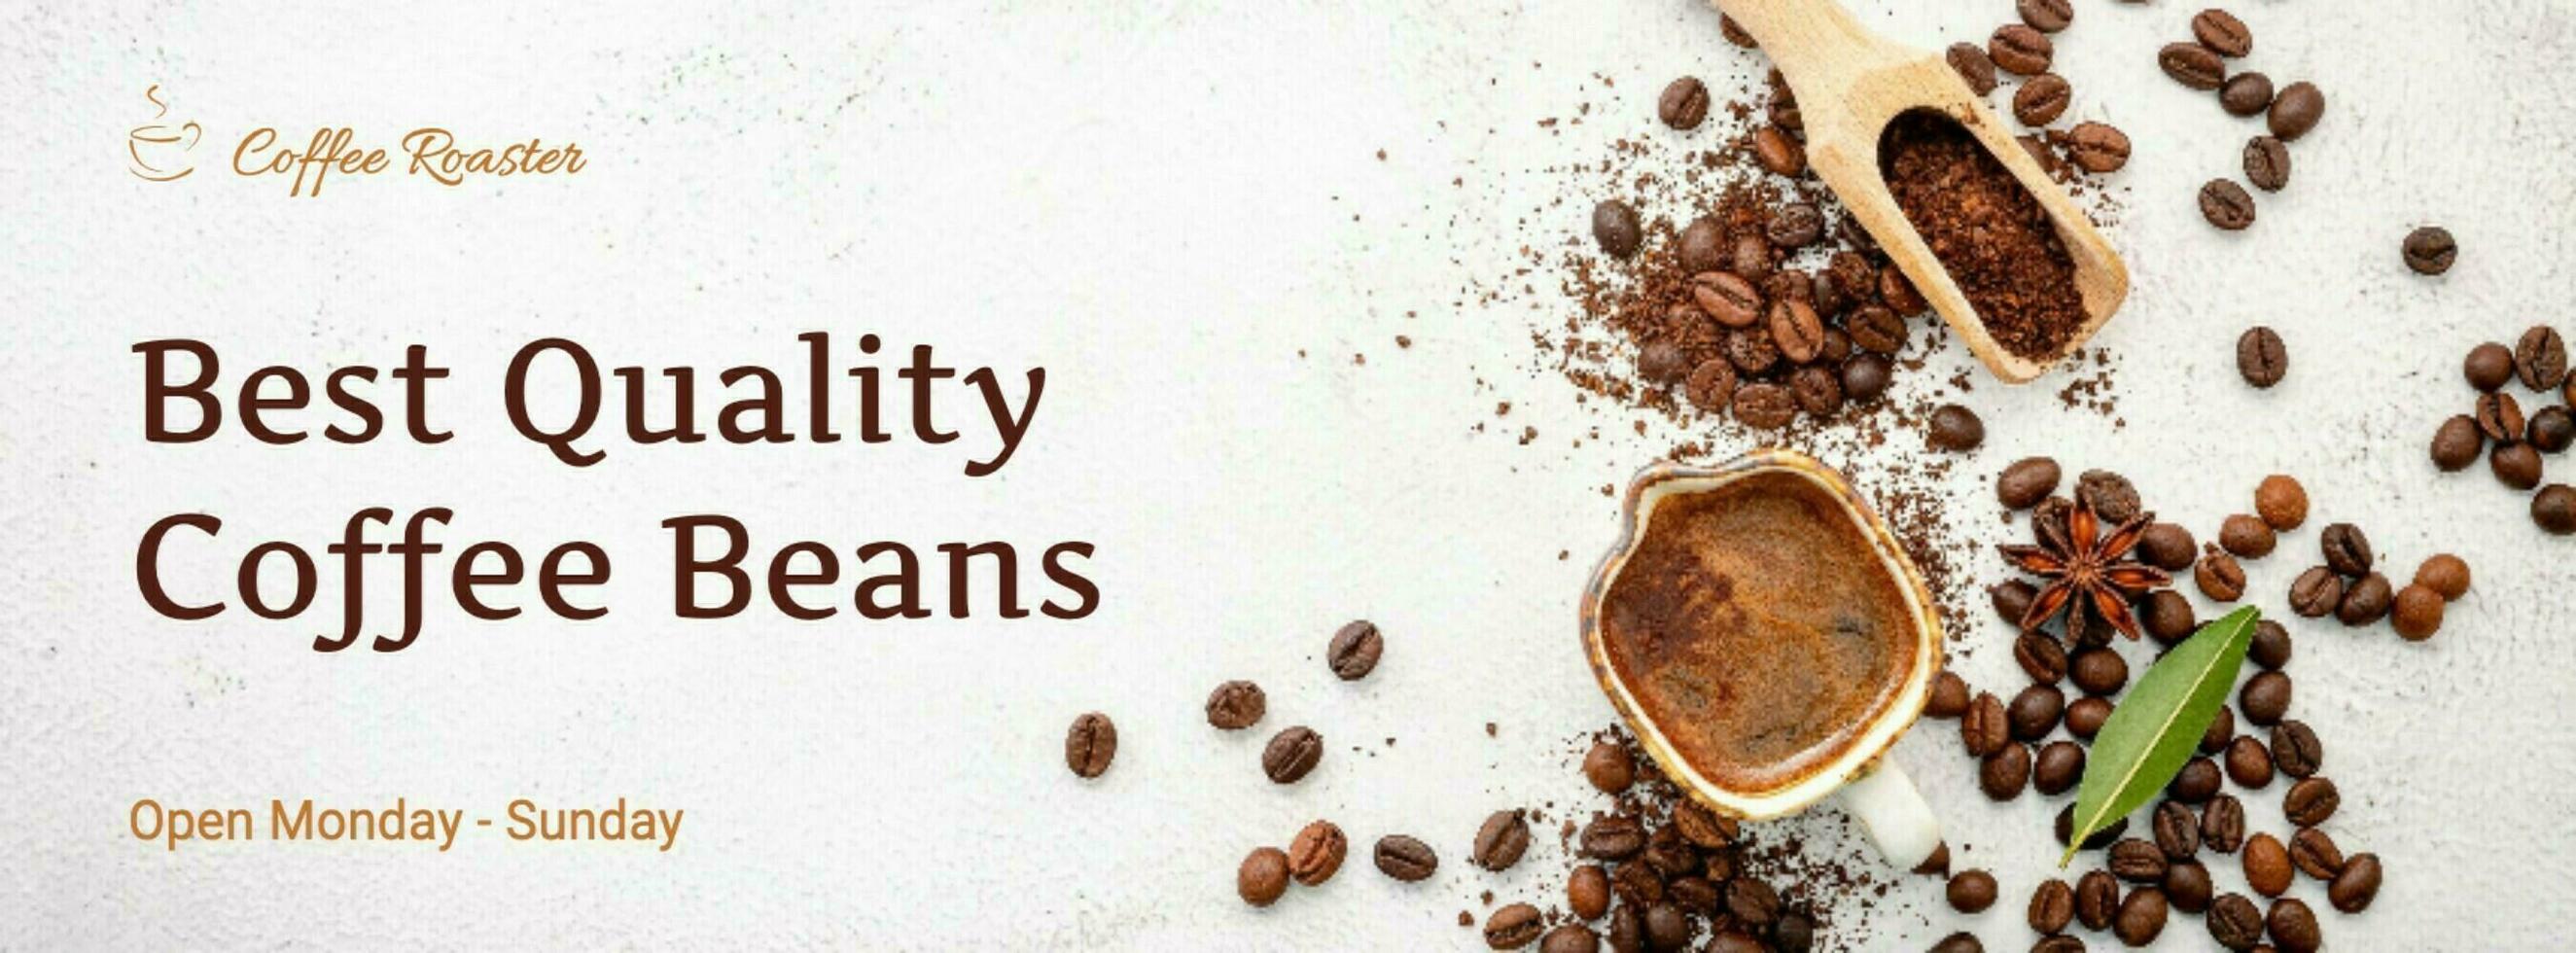 Brown Aesthetic Coffee Beans Roaster Shop Facebook Cover template